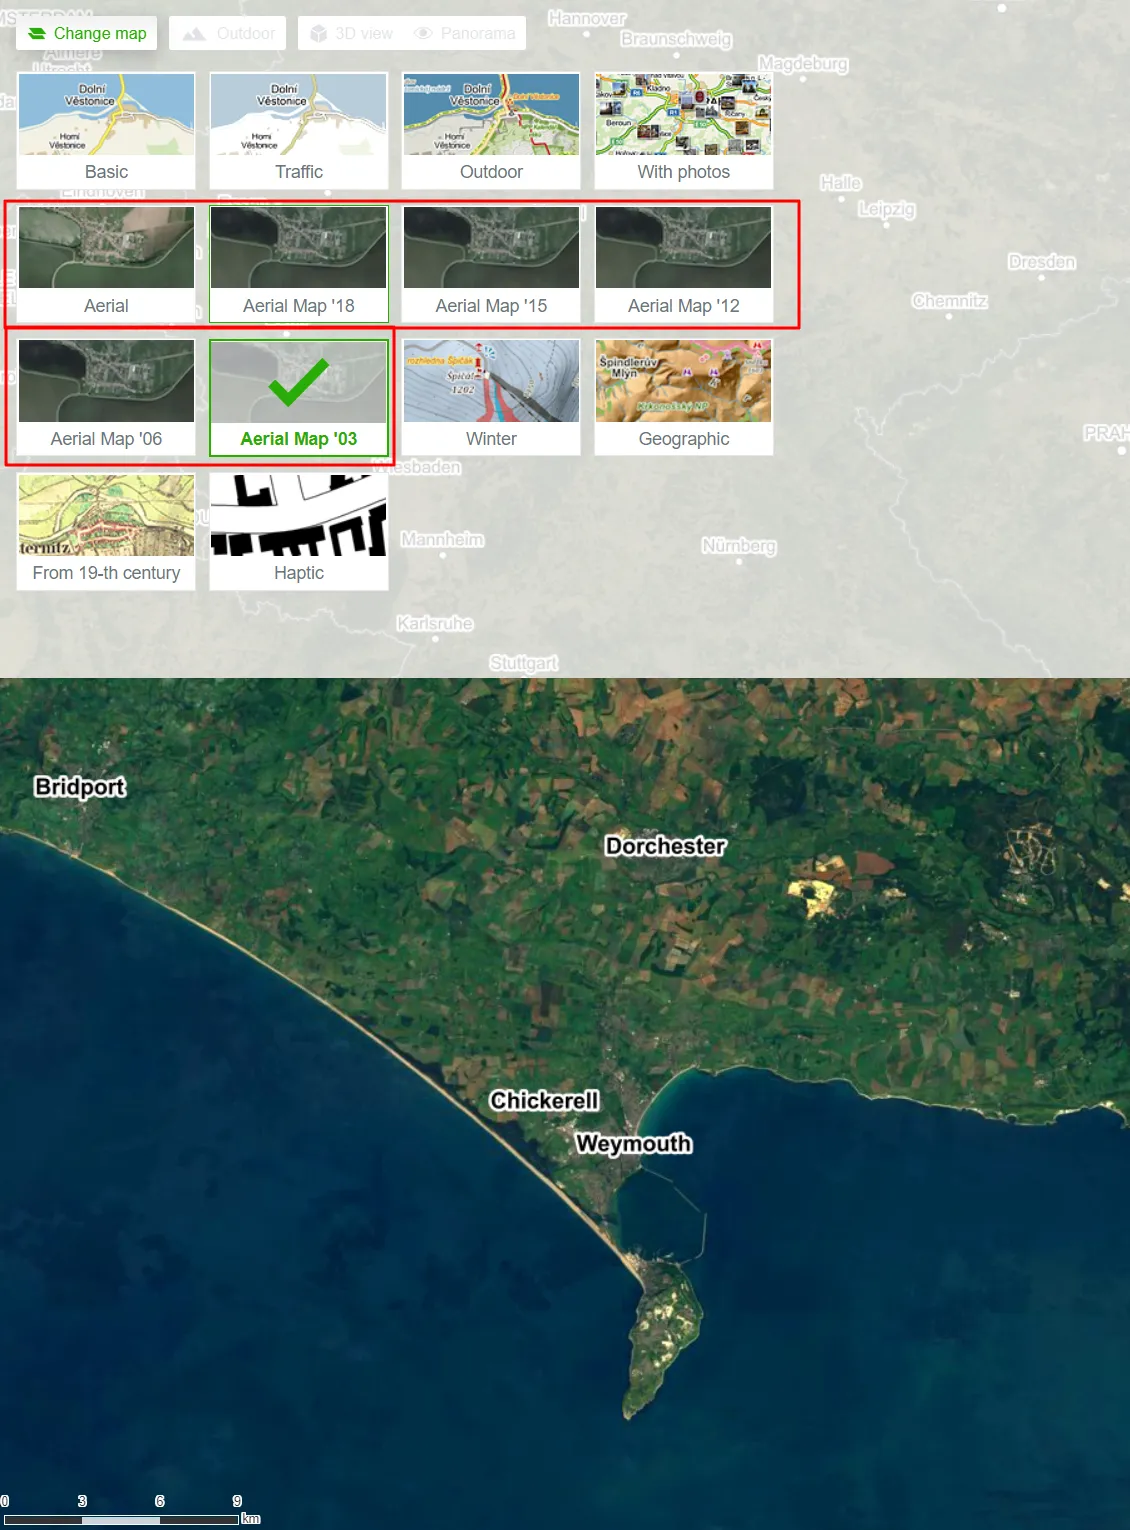 Mapy.cz satellite imagery selection